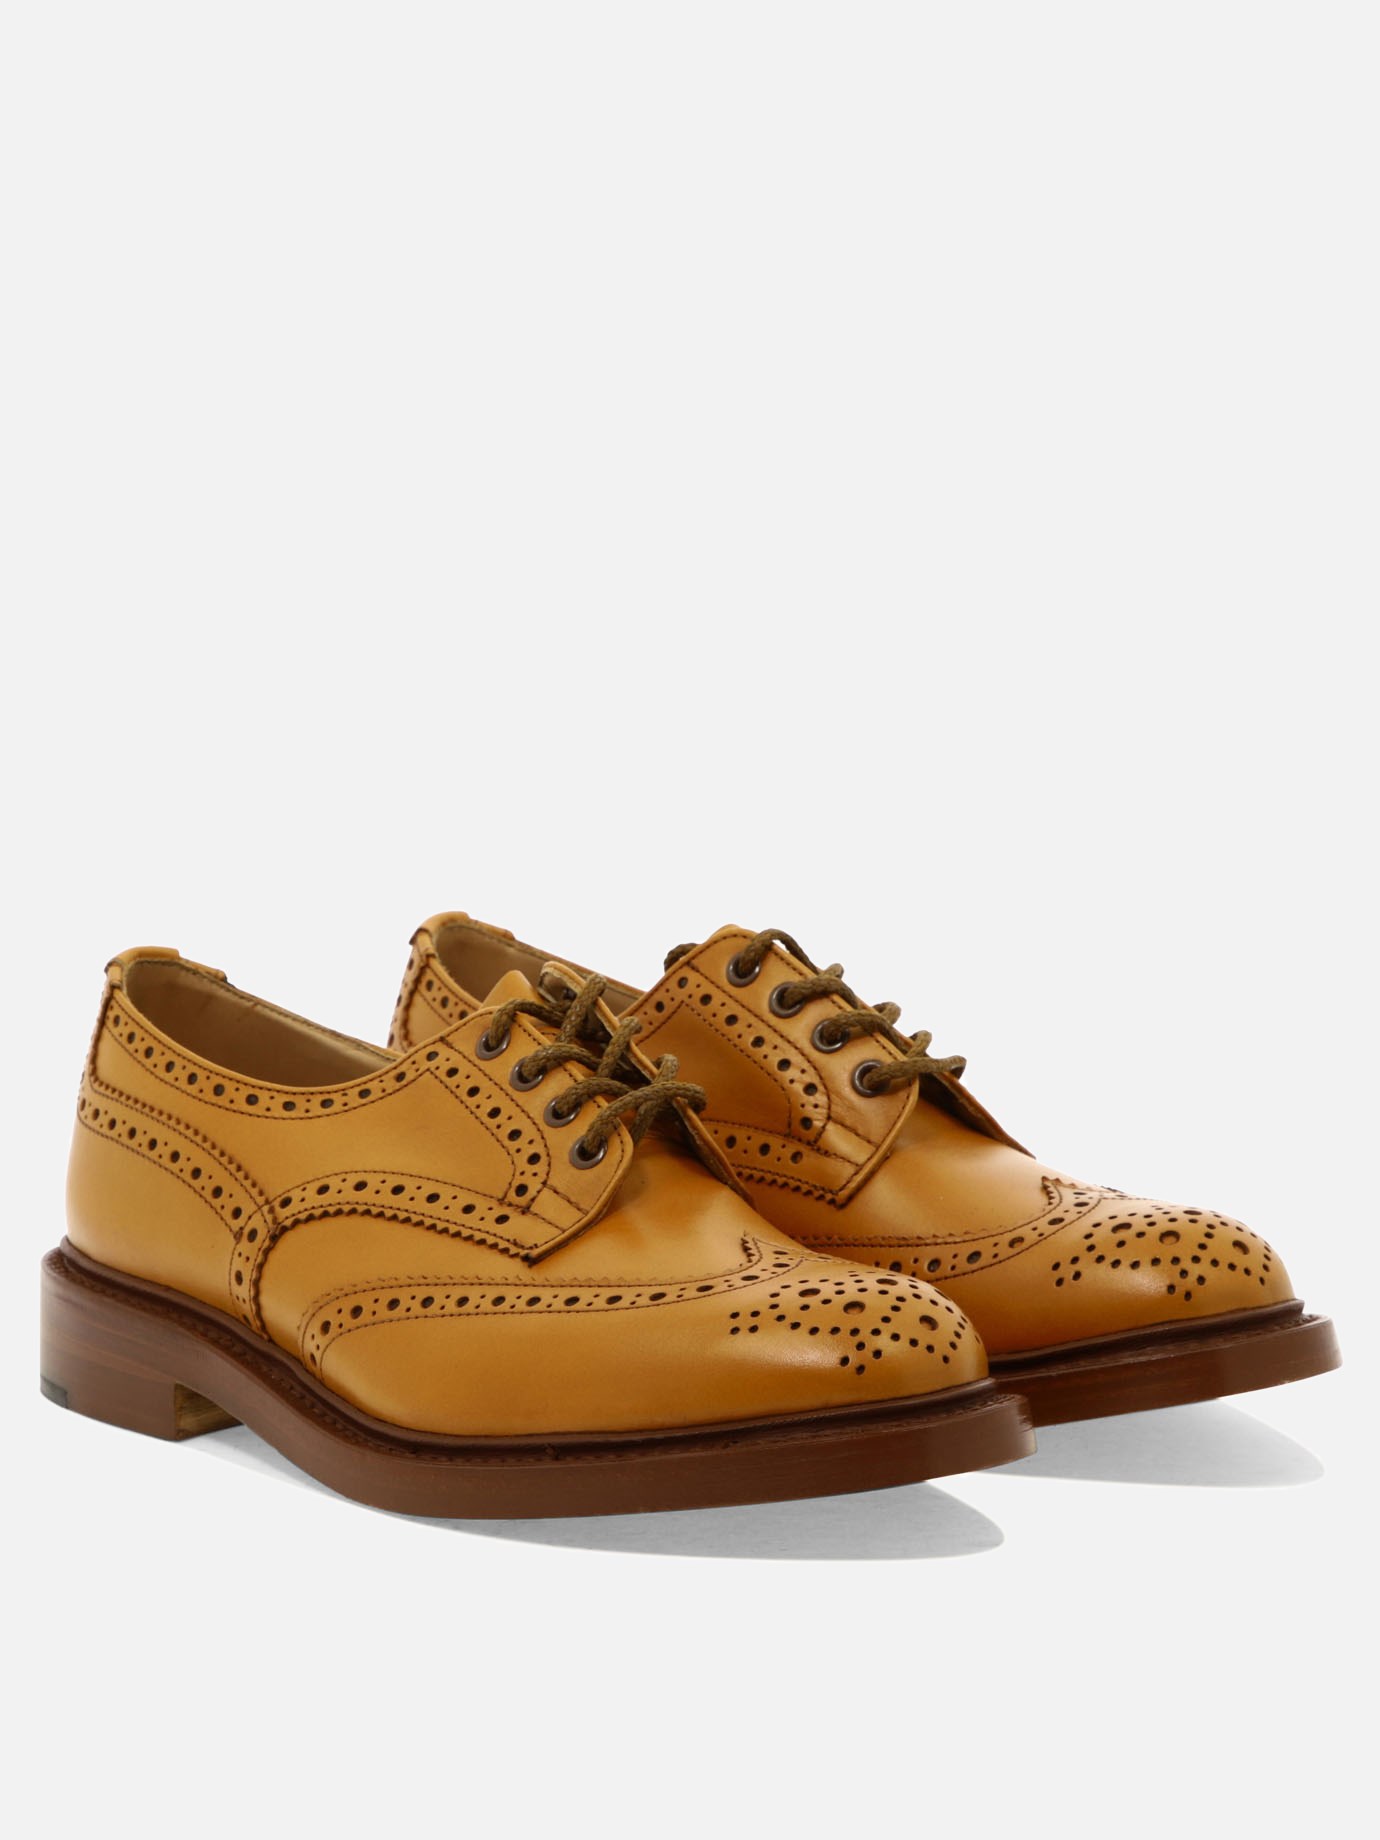 Bourton Lace-Up Shoes of Tricker's | Vietti